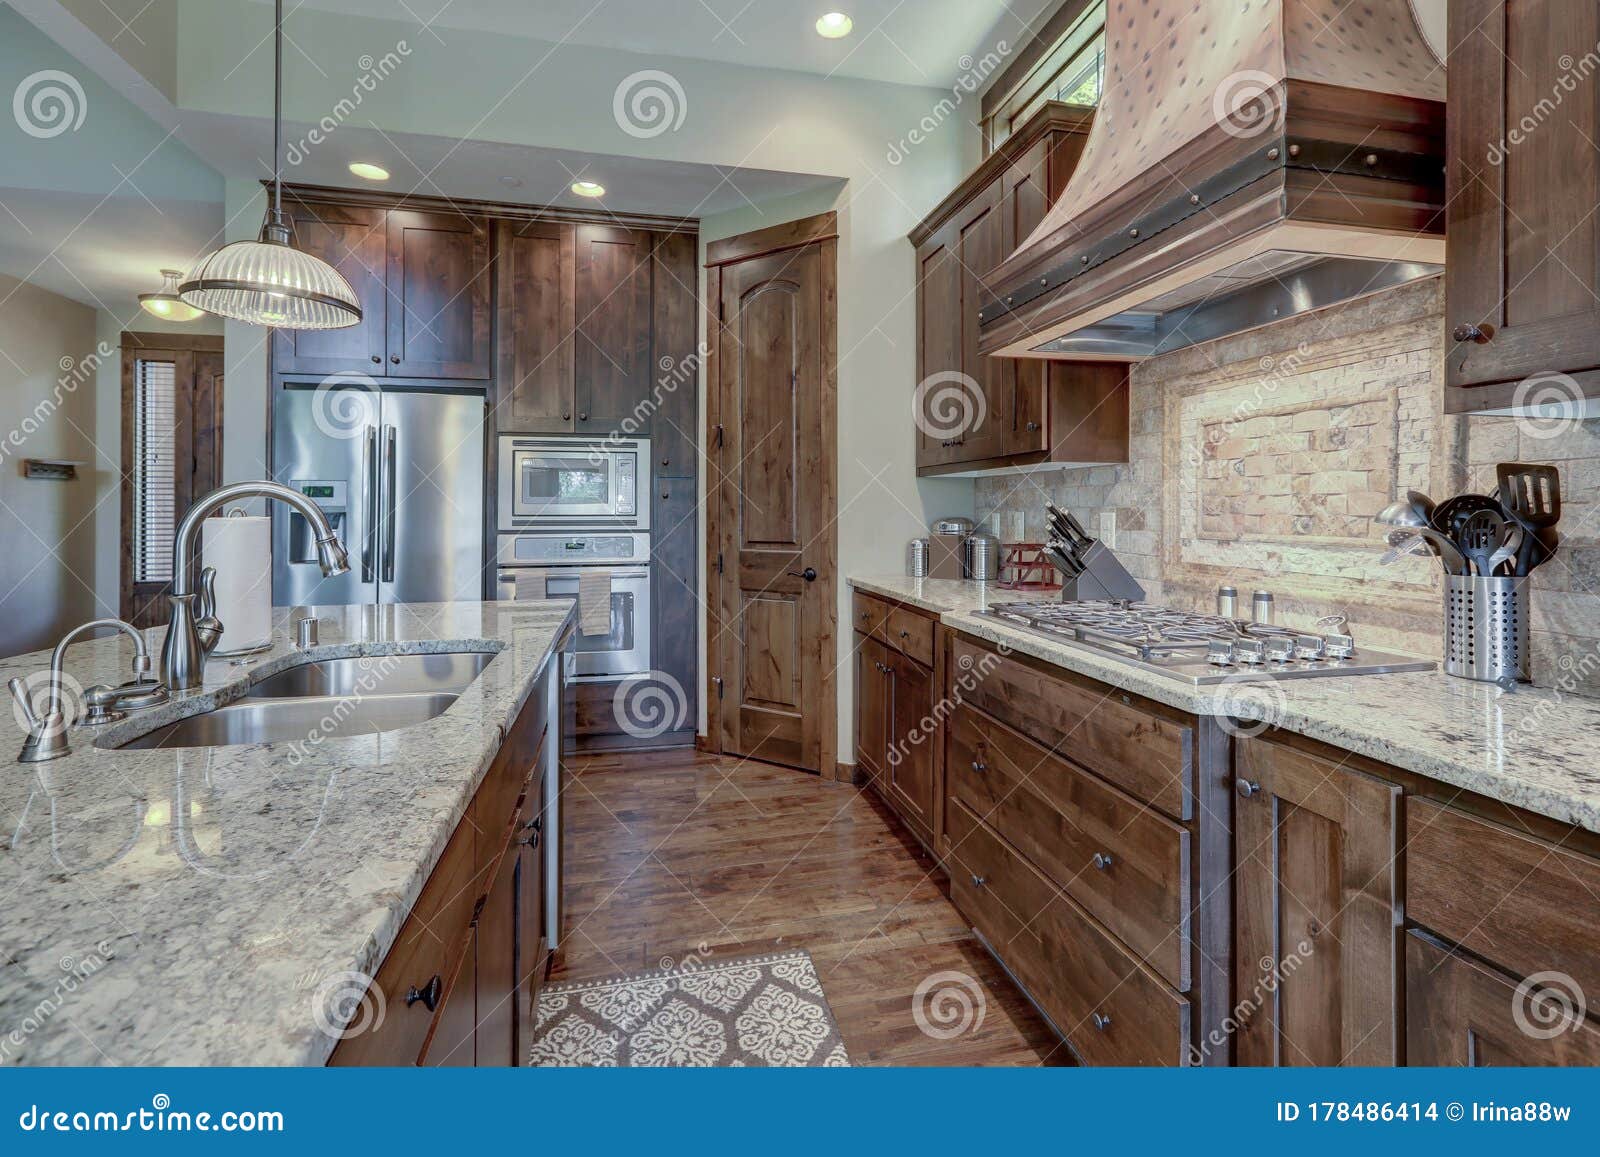 Luxury Dark Wood Rich Kitchen Interior With Copper Stove Hood And Grey Natural Stone Backsplash Stock Photo Image Of Modern Design 178486414